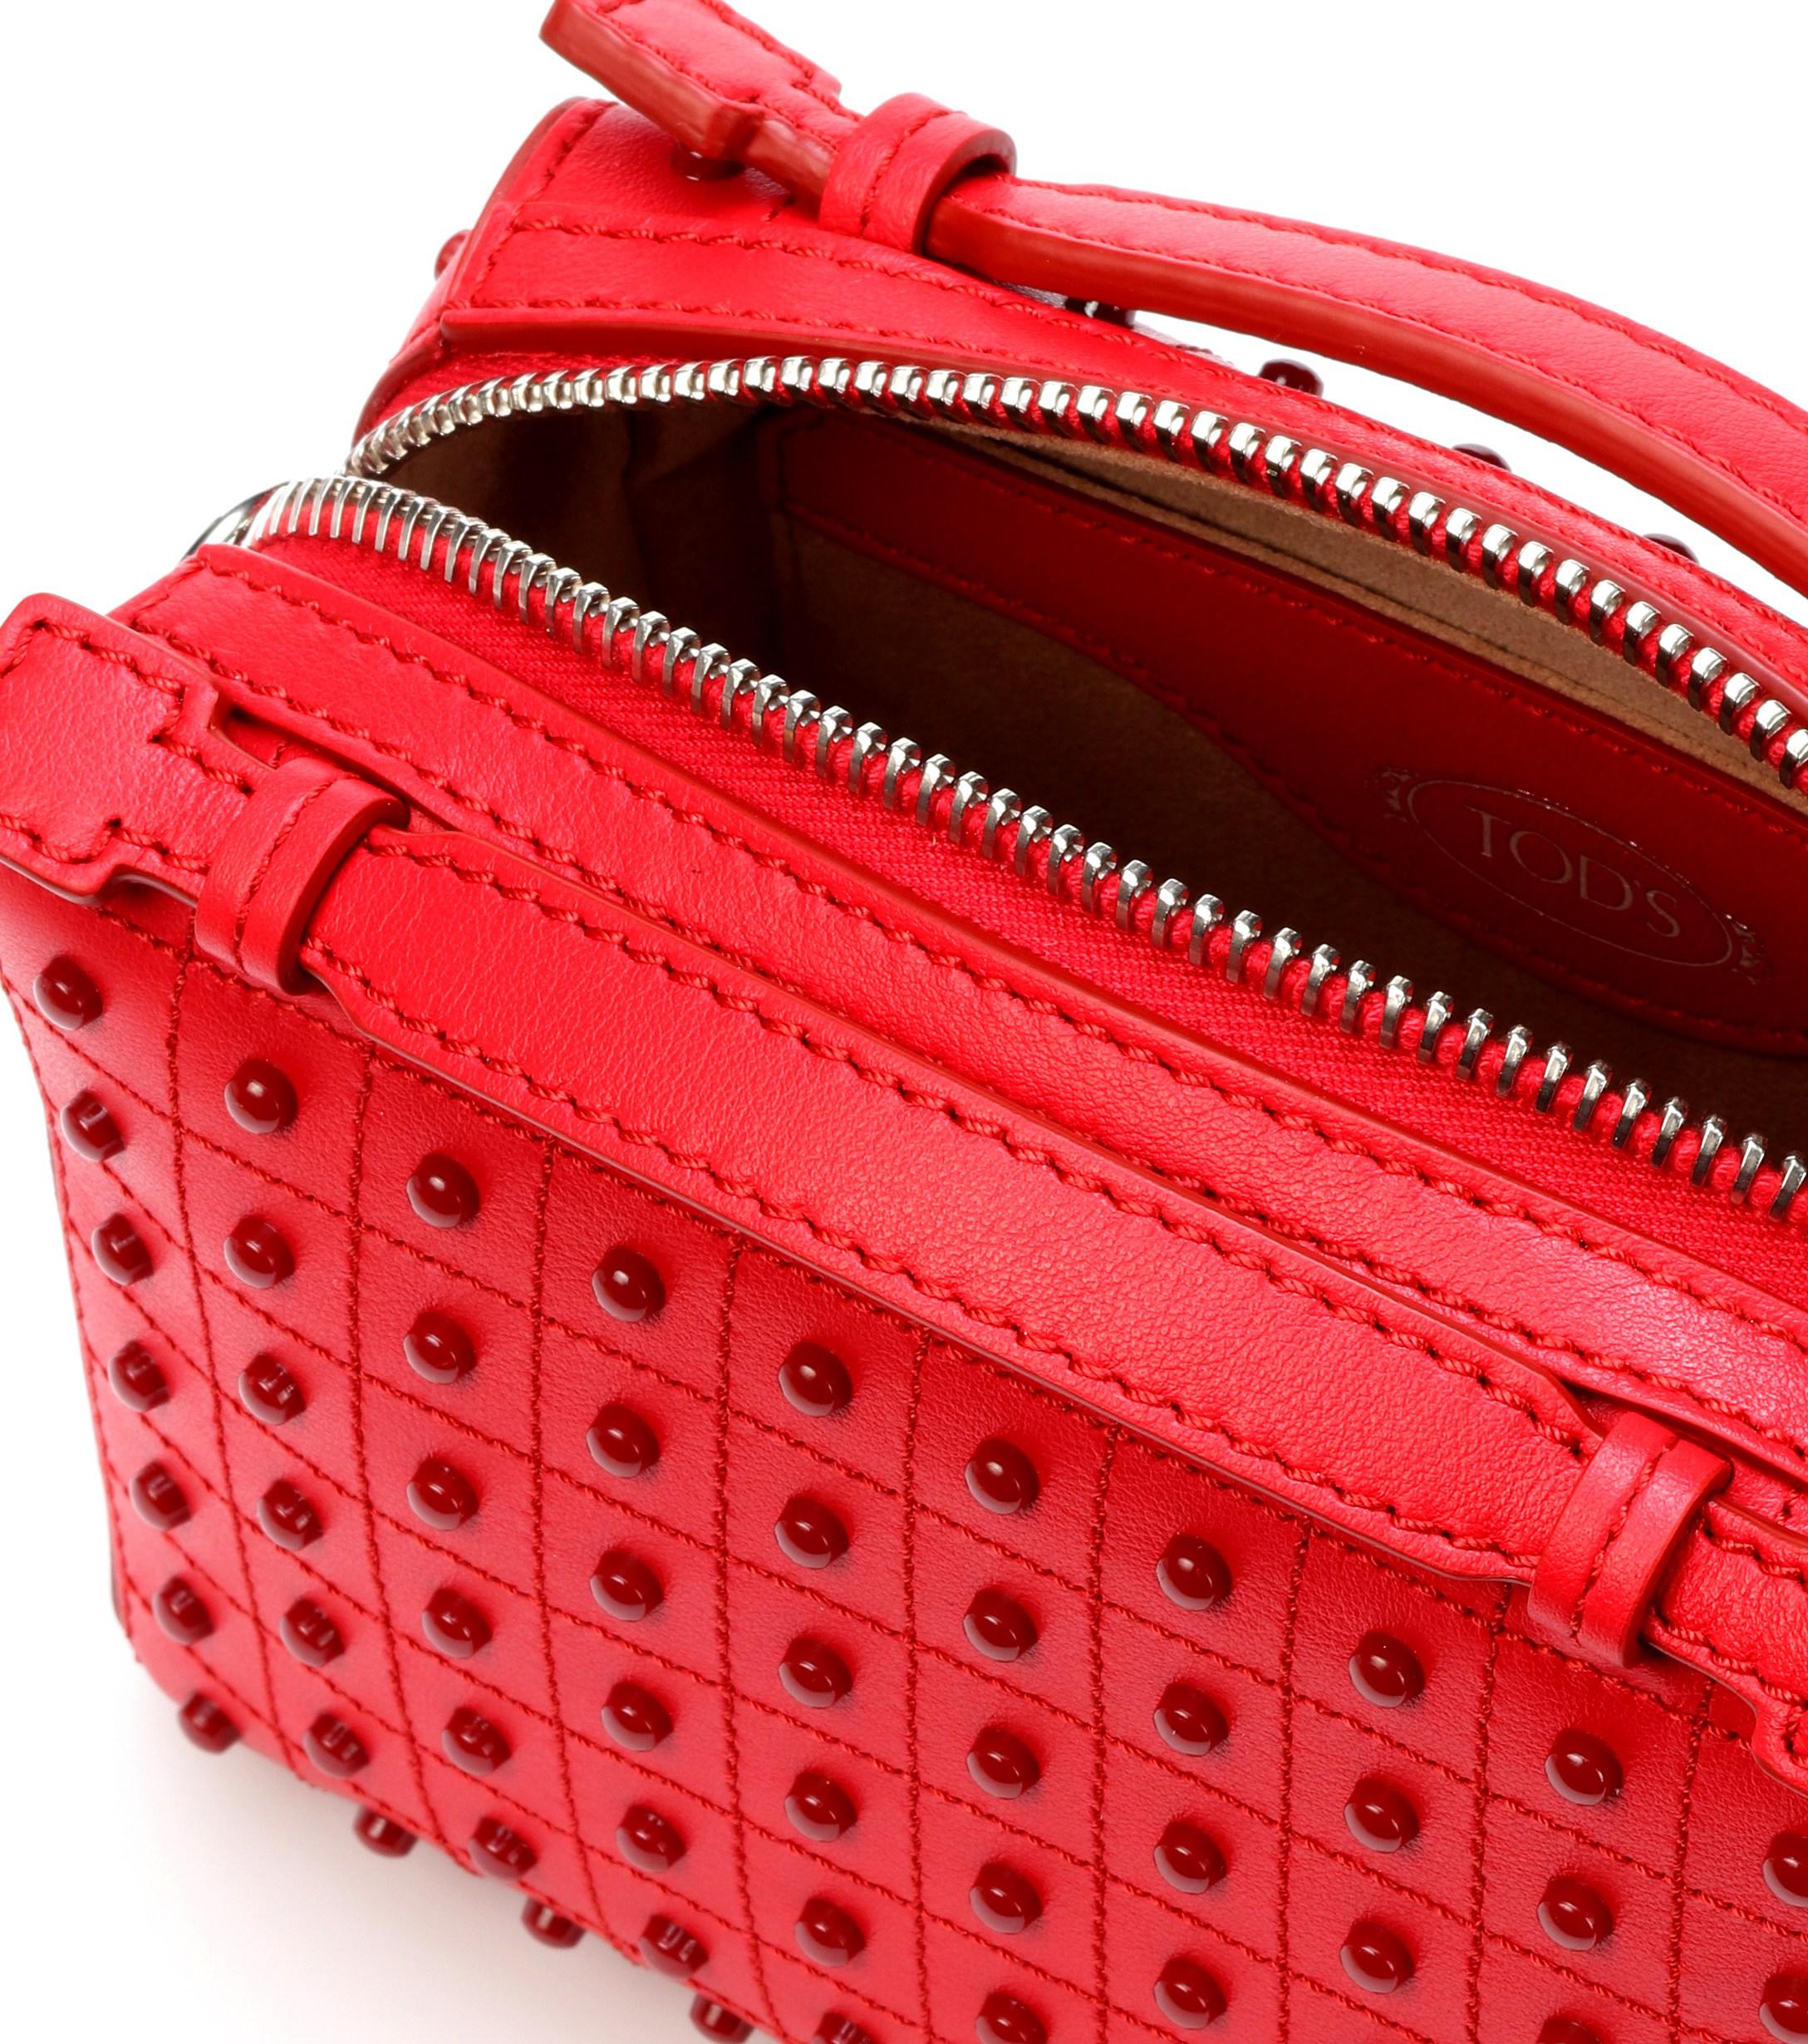 Tod's Gommino Micro Leather Shoulder Bag in Red - Lyst